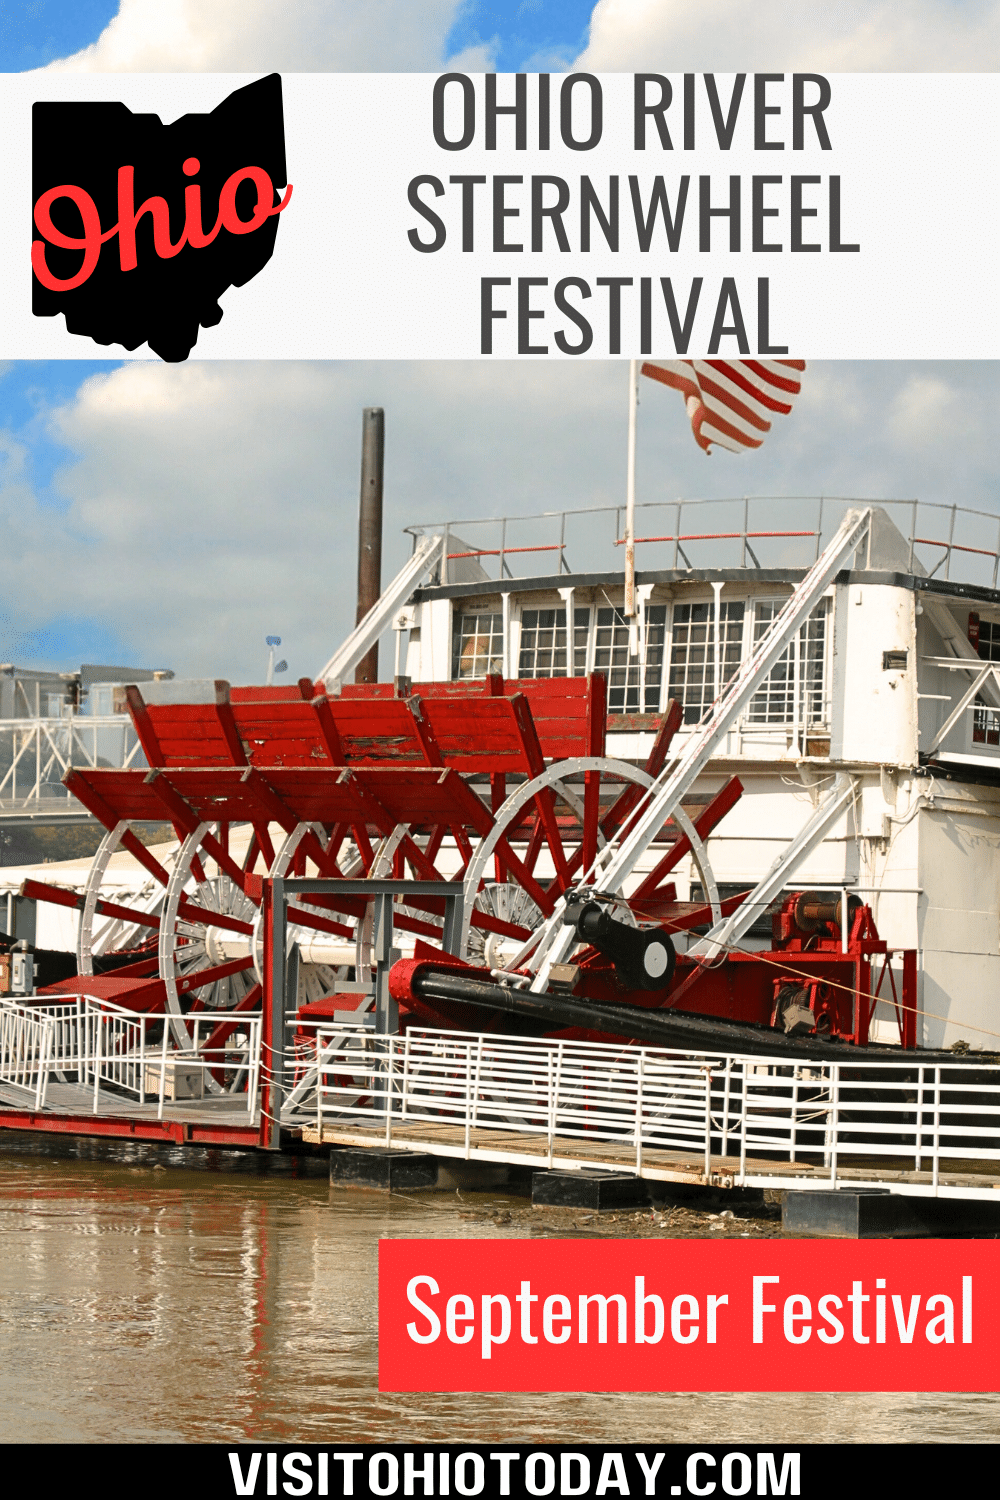 The Ohio River Sternwheel Festival takes place on the weekend after Labor Day in Marietta. Three days of family fun, featuring more than 35 sternwheelers docked along the Marietta waterfront.